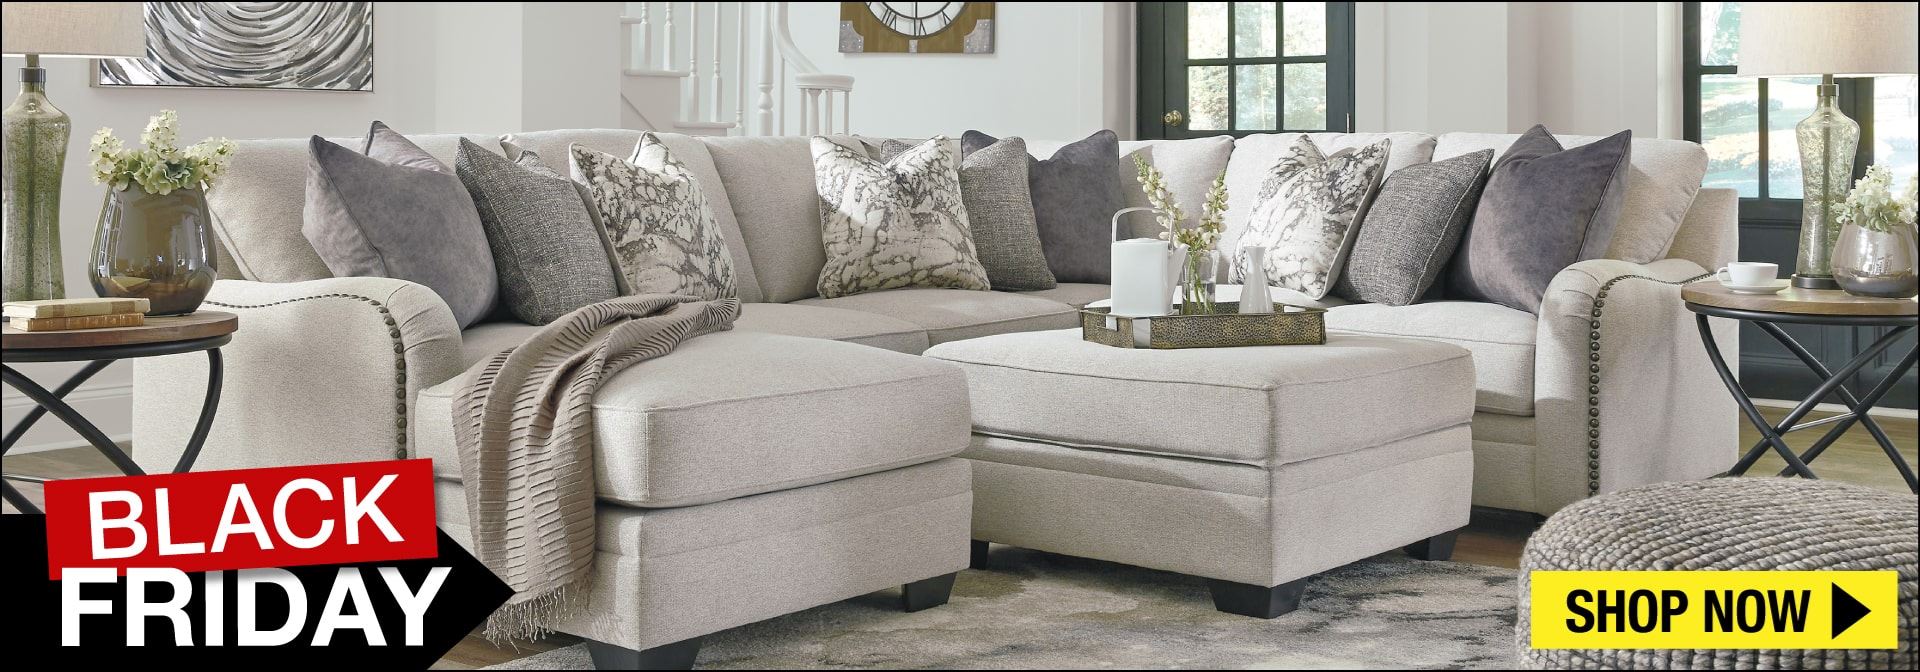 AFW Lowest Prices Best Selection In Home Furniture AFW